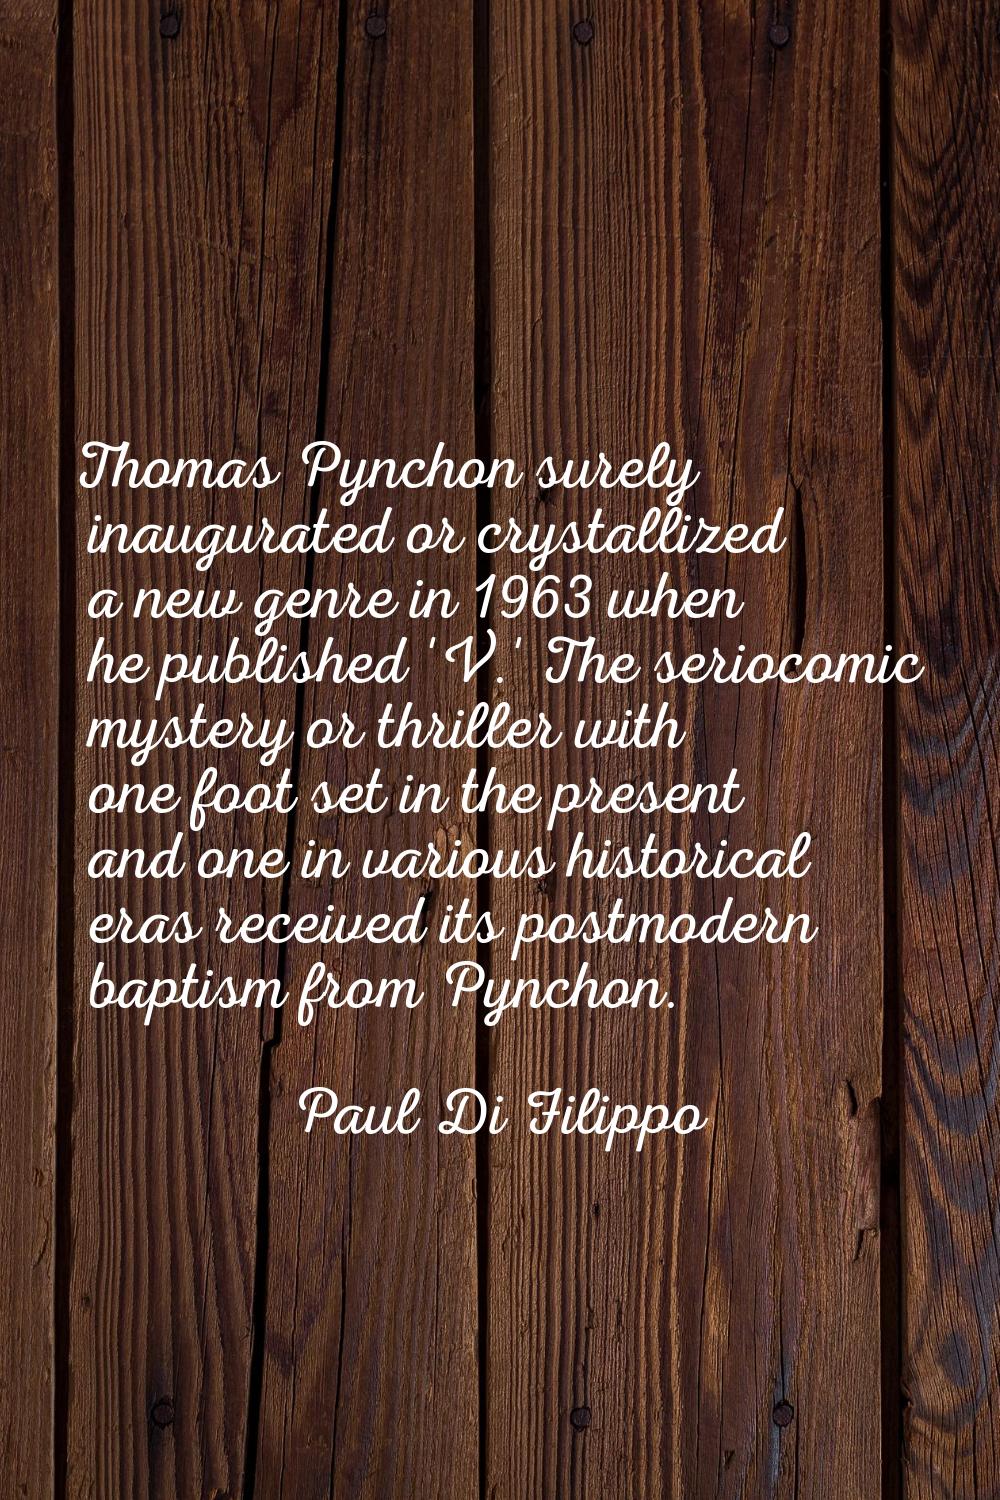 Thomas Pynchon surely inaugurated or crystallized a new genre in 1963 when he published 'V.' The se